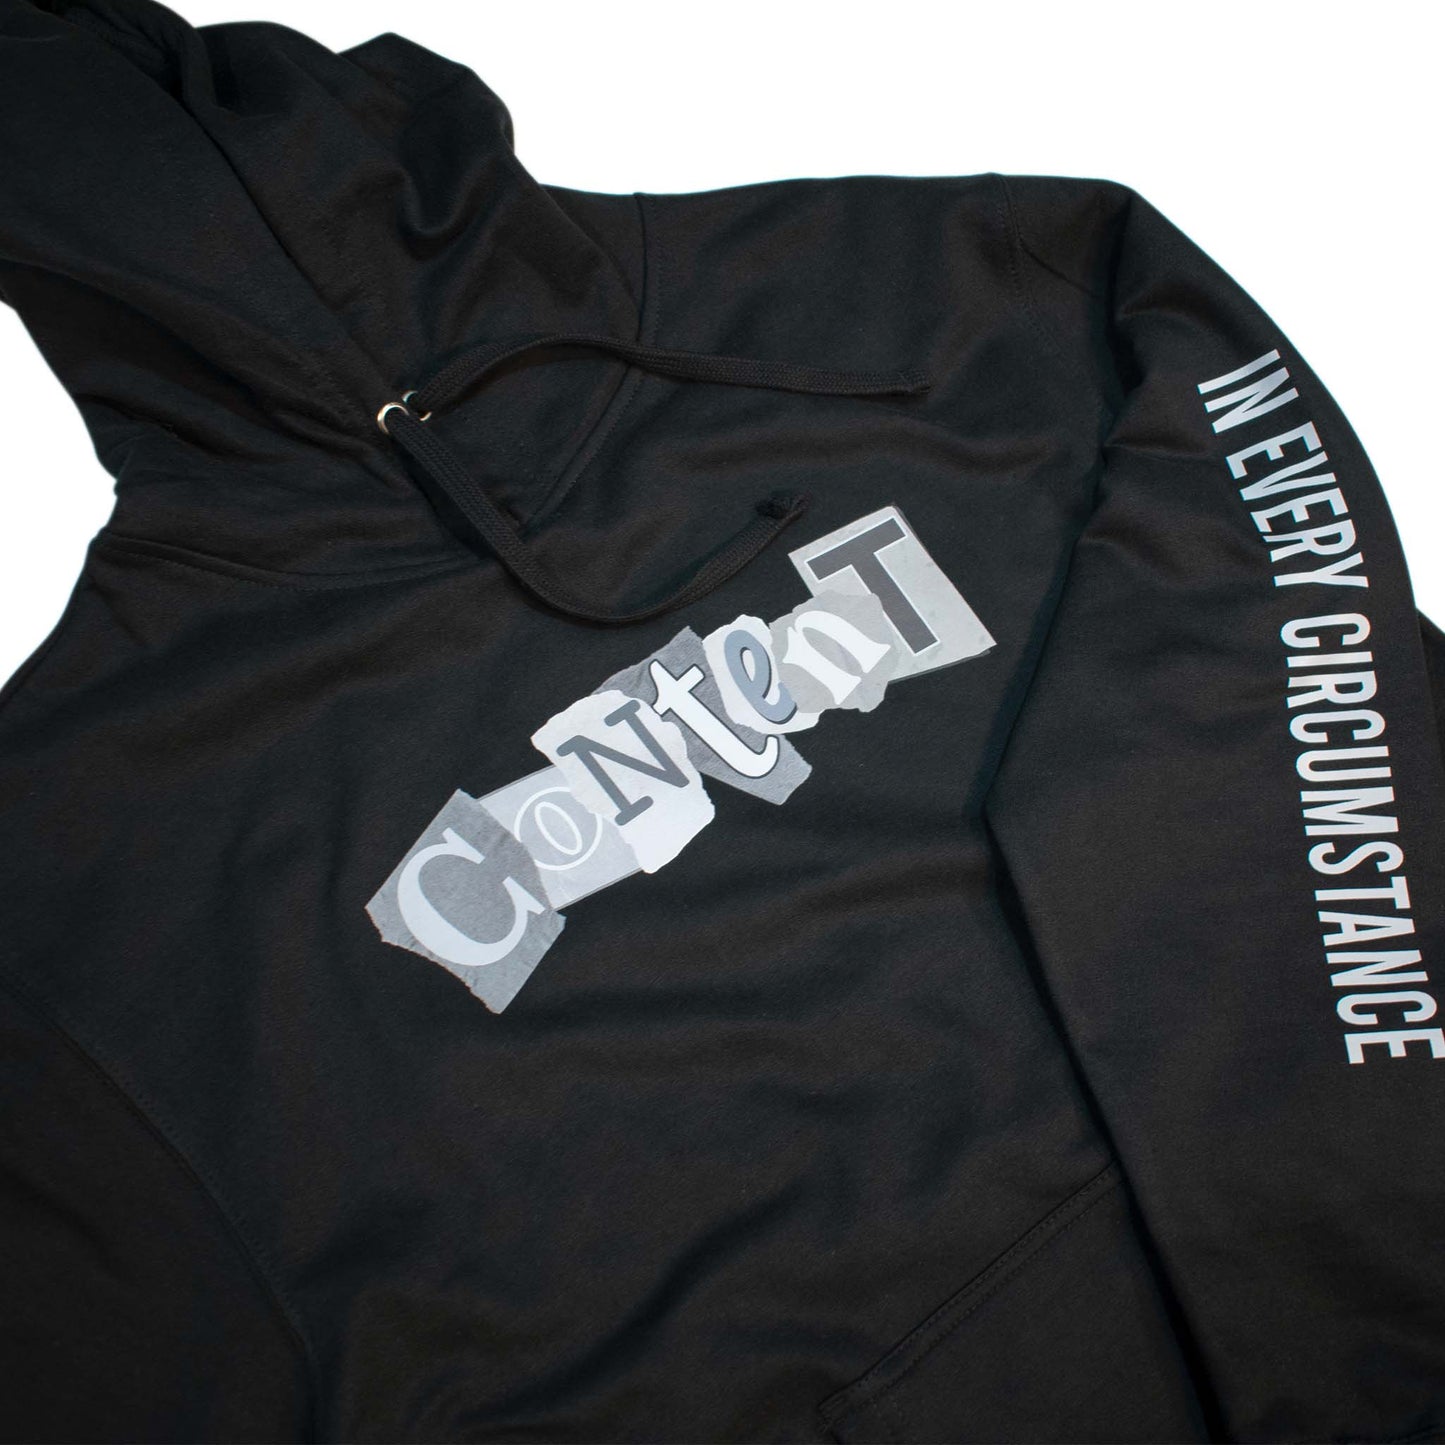 Content In Every Circumstance - Black Hoodie